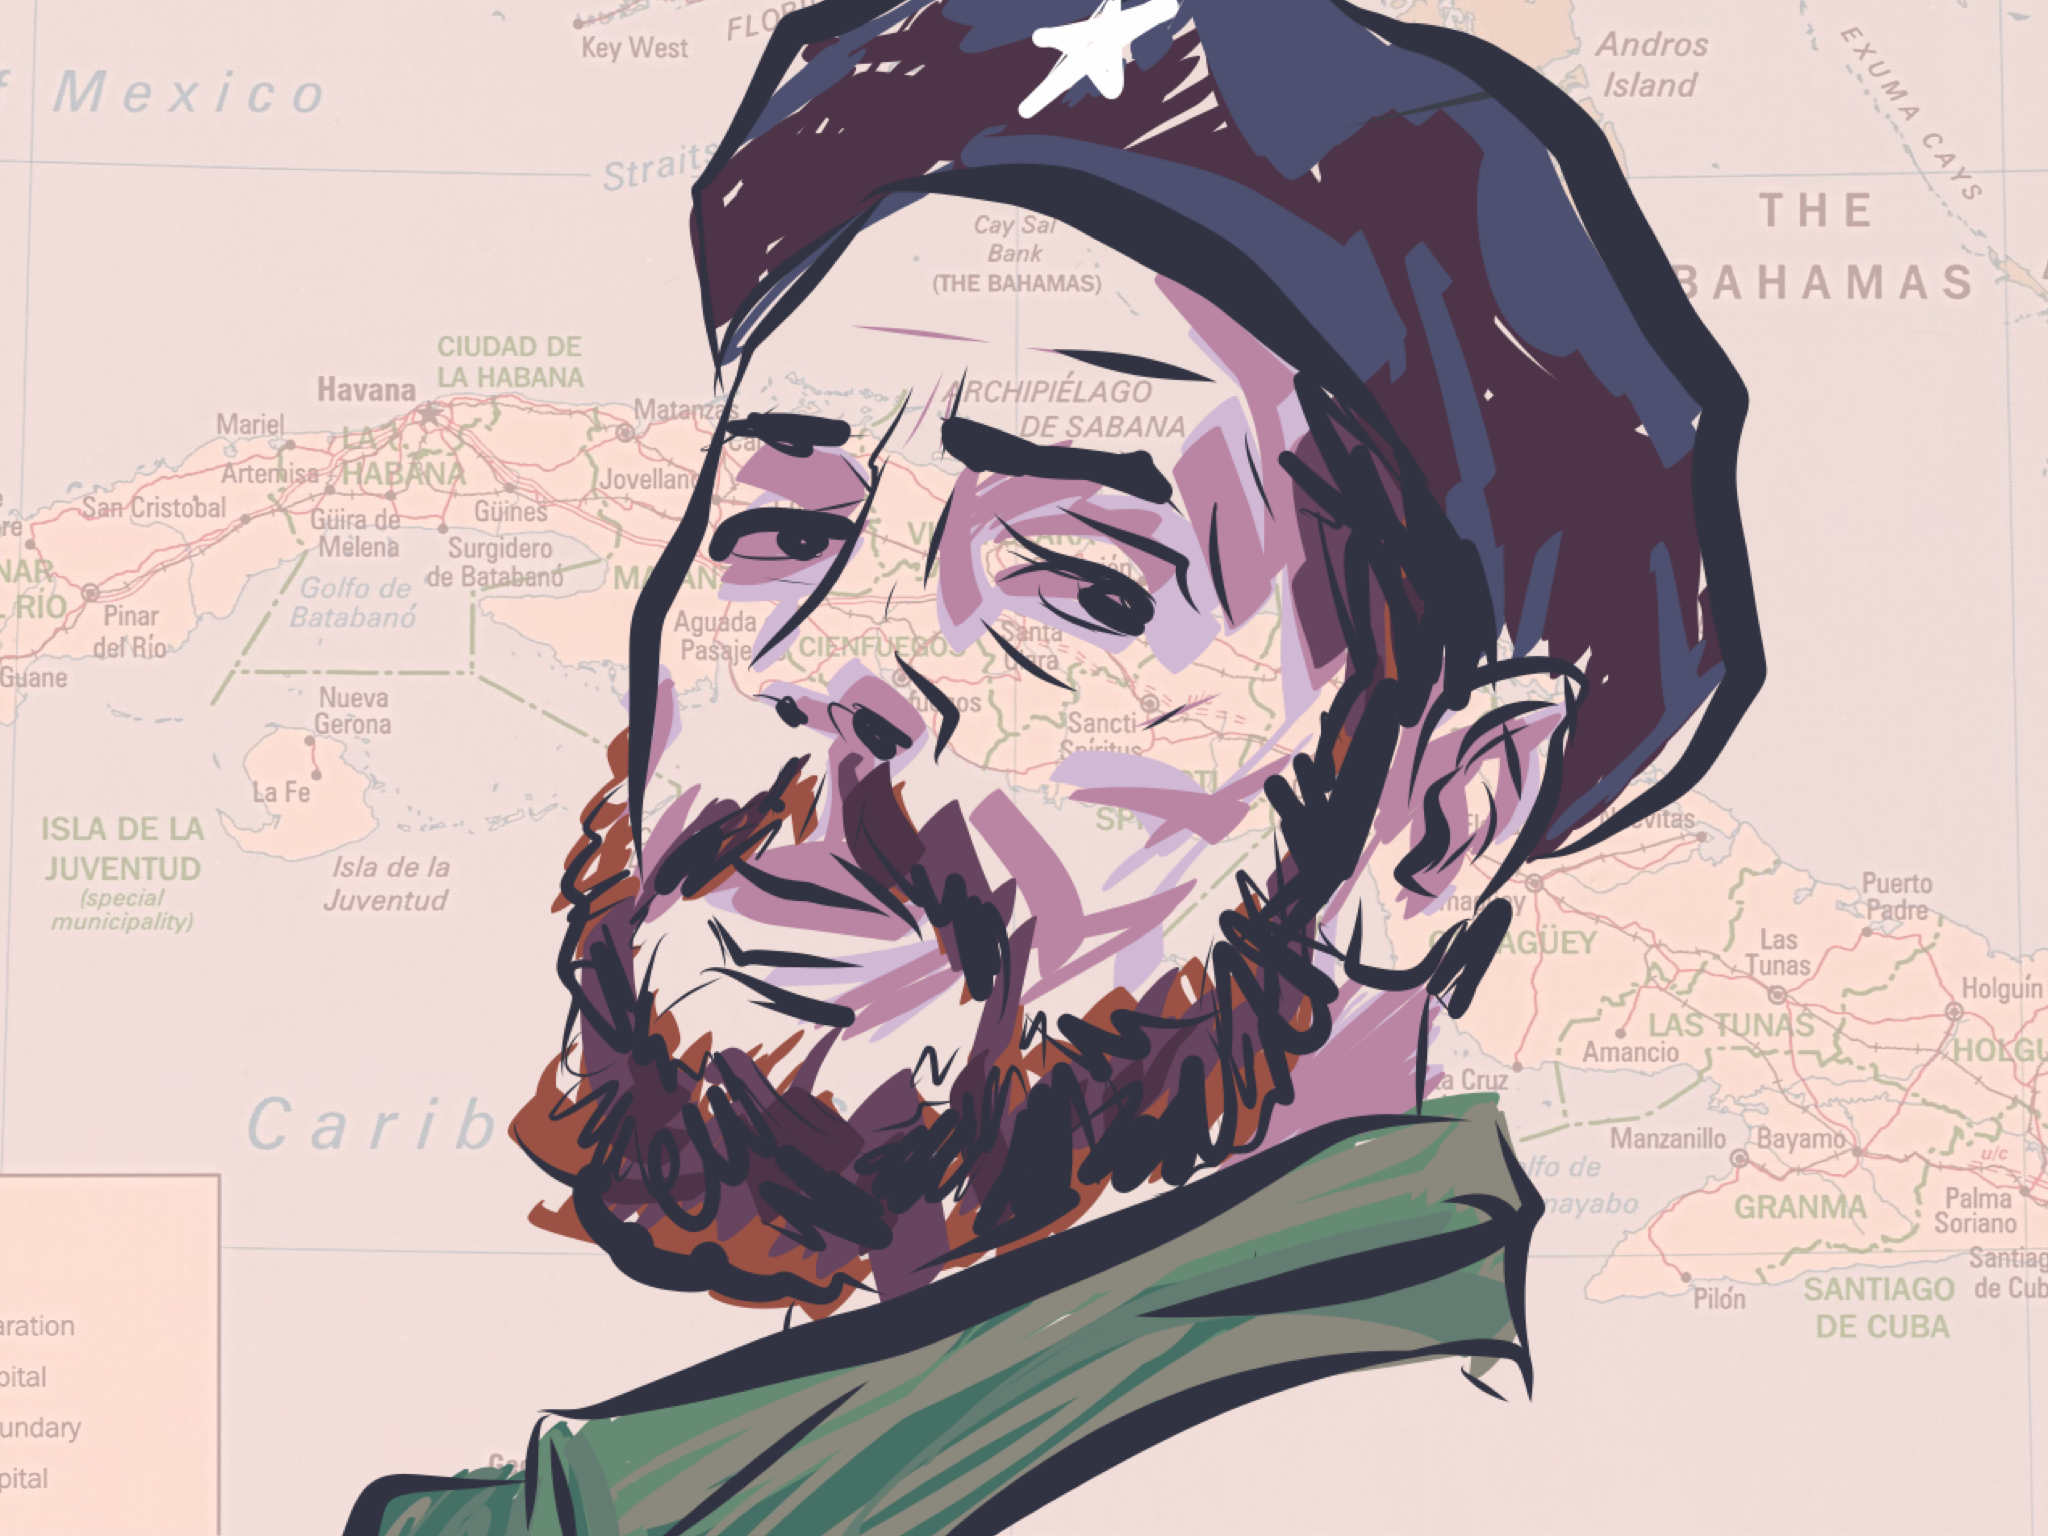 Che, Made with an Apple Pencil and Adobe Illustrator Draw